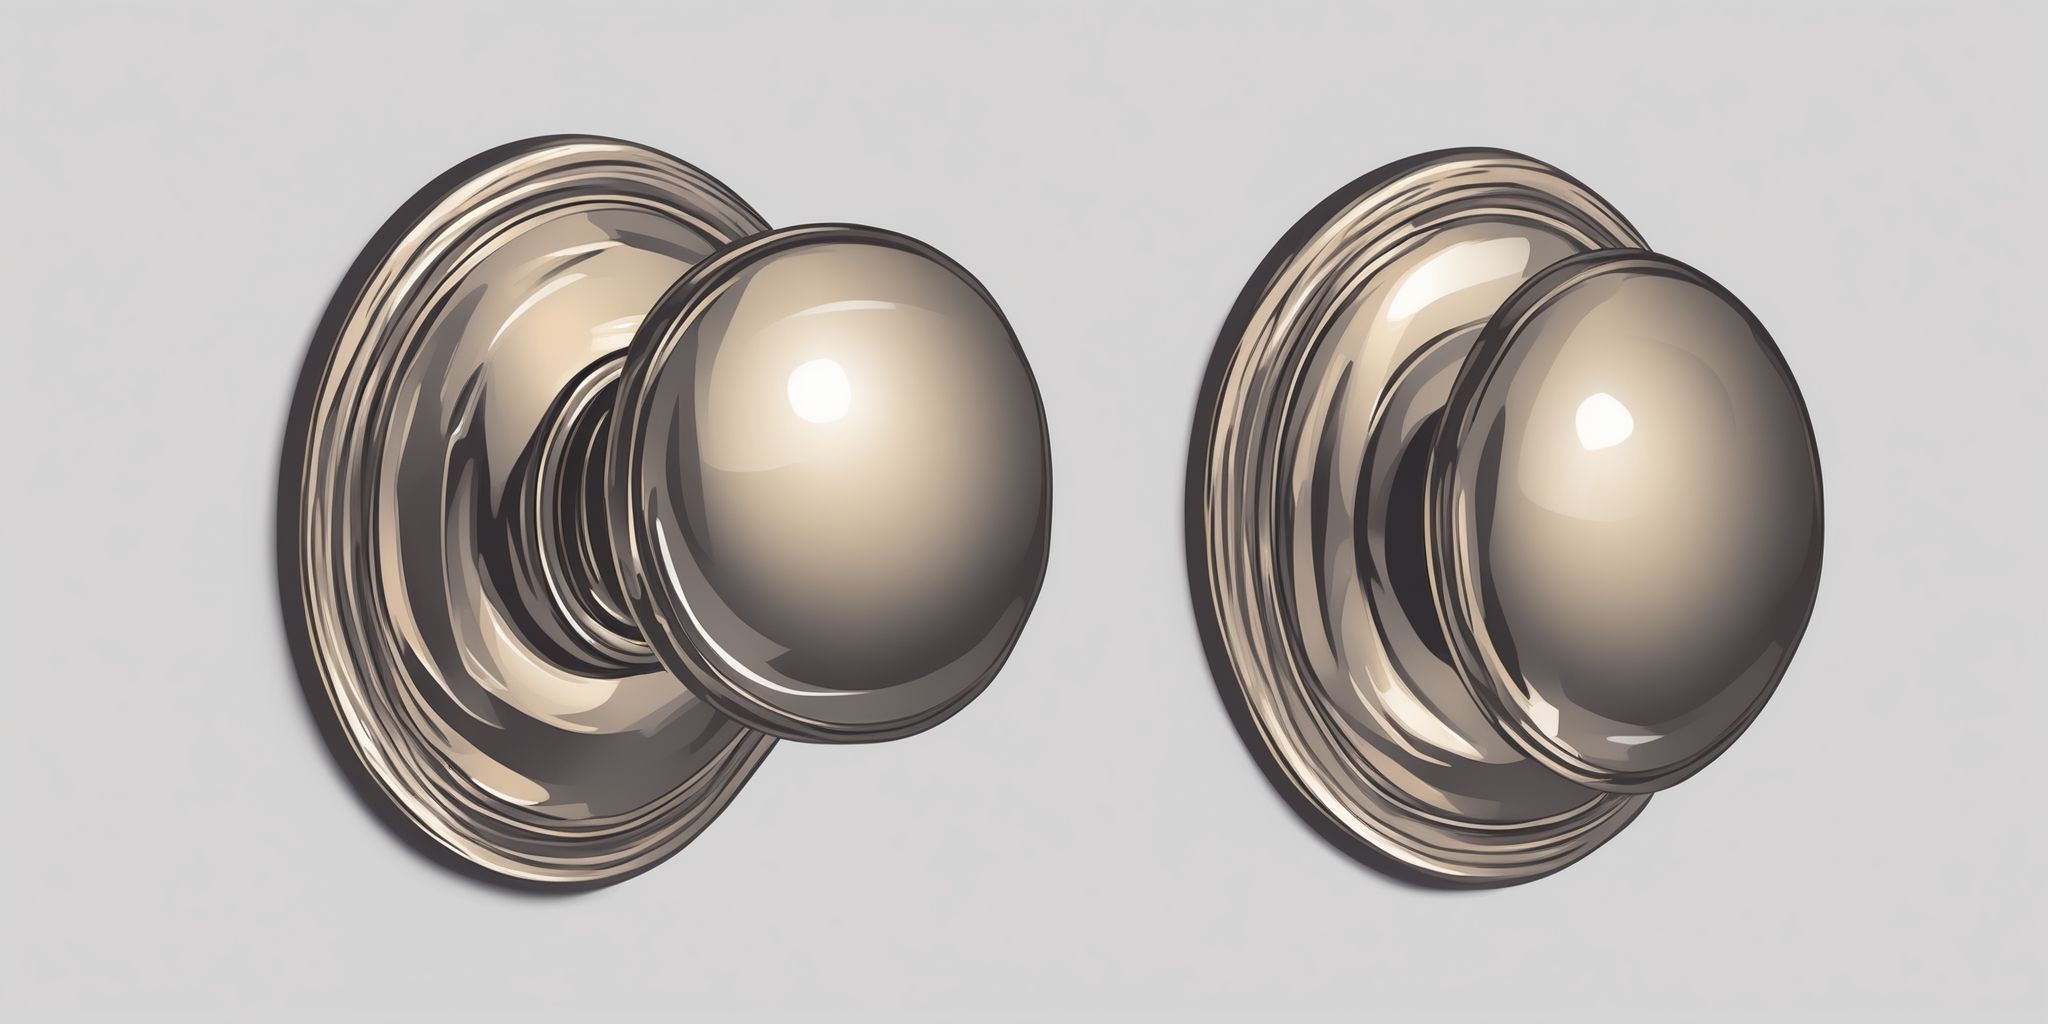 Handle: Doorknob in illustration style with gradients and white background